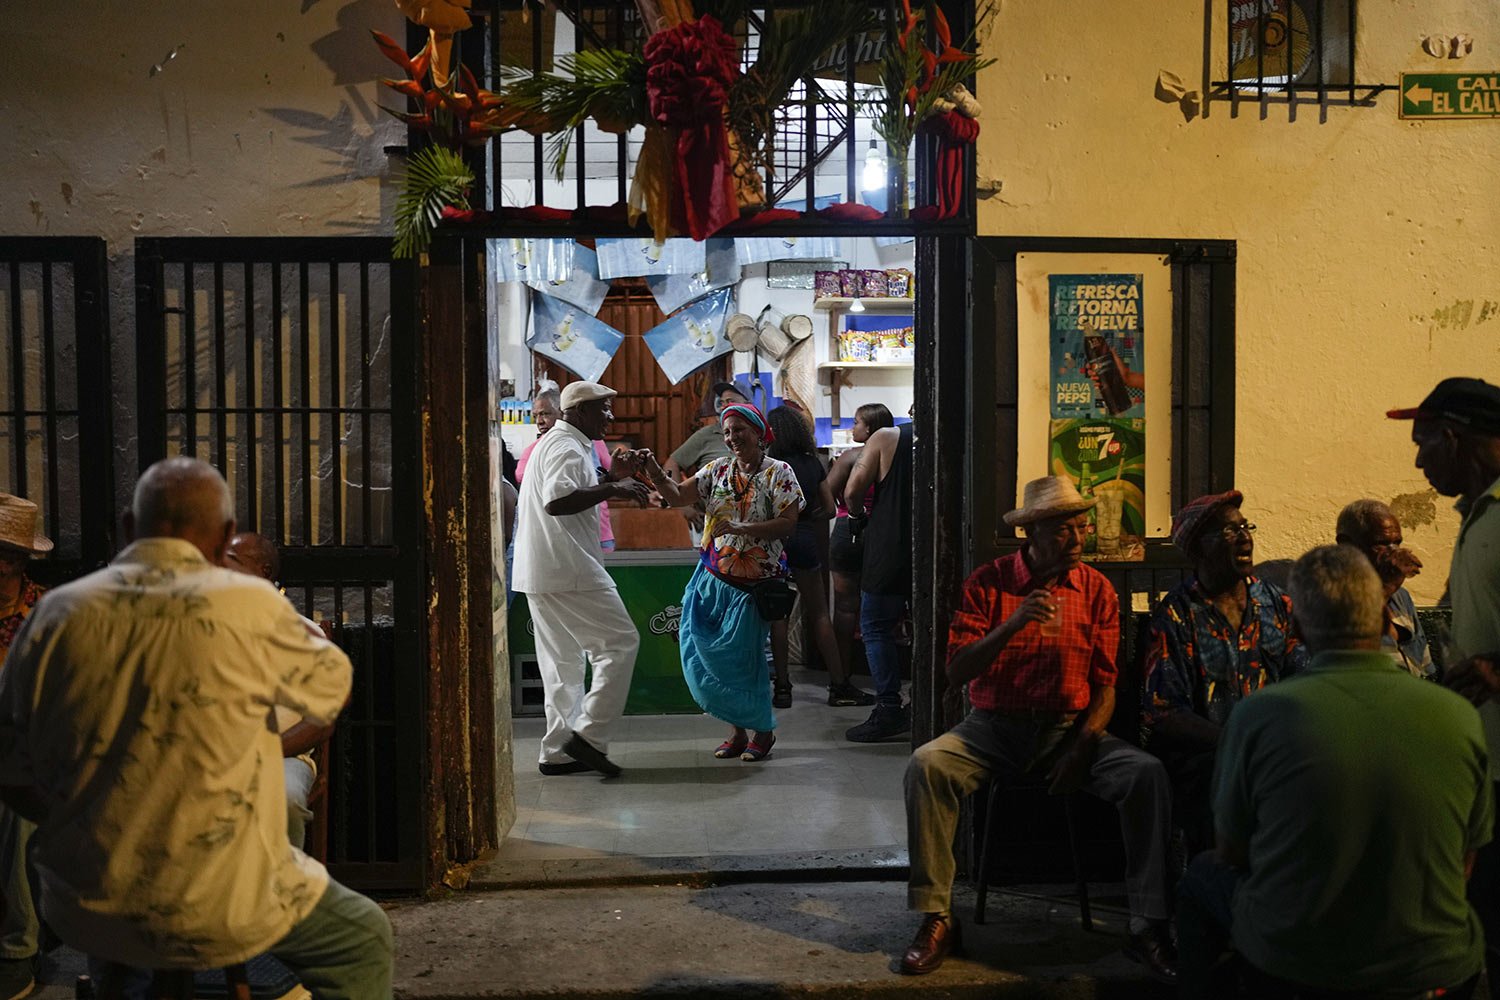  Residents dance during the San Juan Bautista celebrations in Curiepe, Venezuela, Thursday, June 23, 2022. The celebration commemorates the birth of St. John the Baptist and according to local lore the festival is the time when enslaved African Ameri